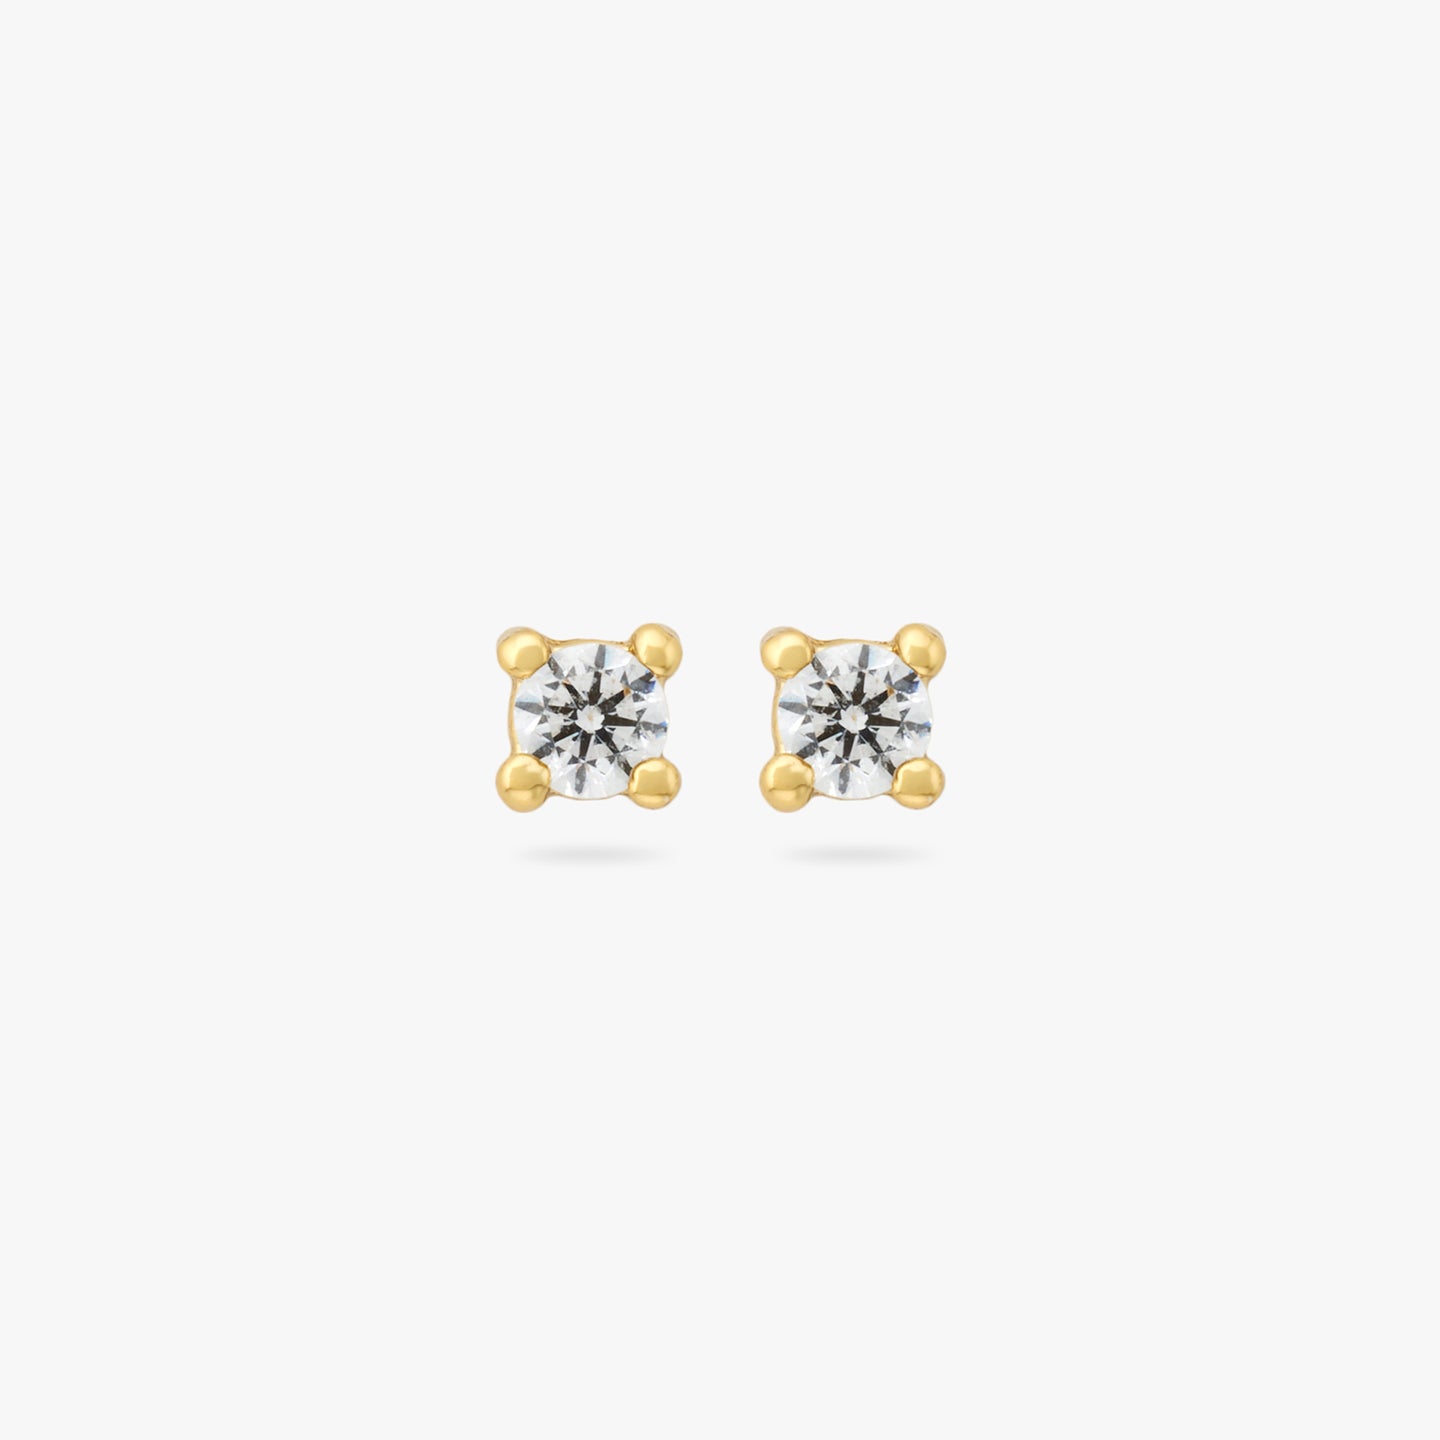 A pair of mini gold studs with clear cz gems [pair] color:null|gold/clear